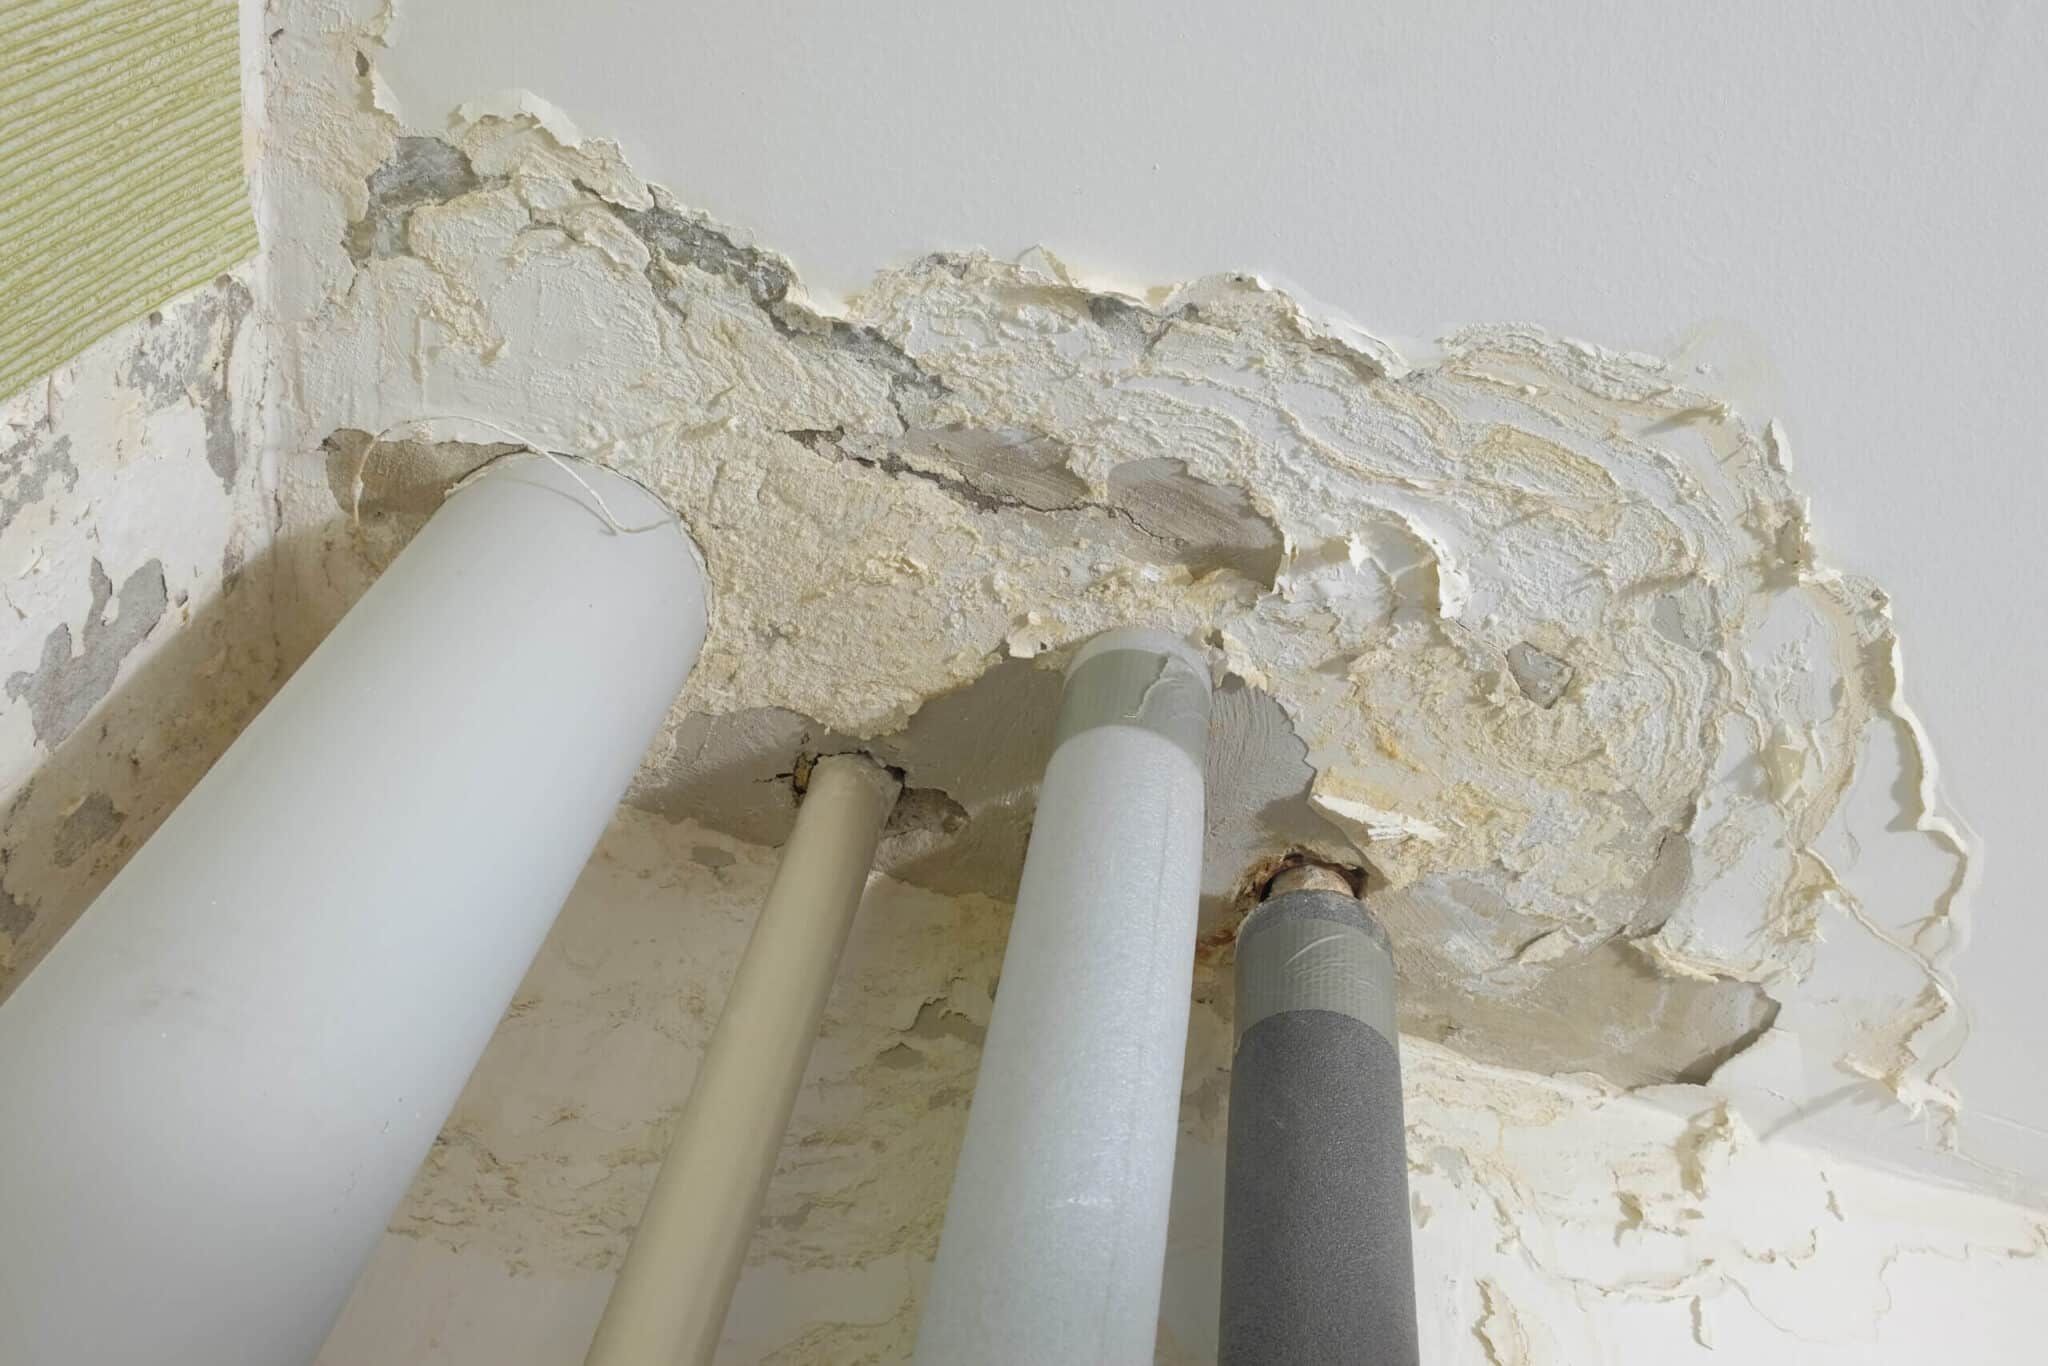 How Do You Tell If Pipes Are Leaking Behind a Wall?